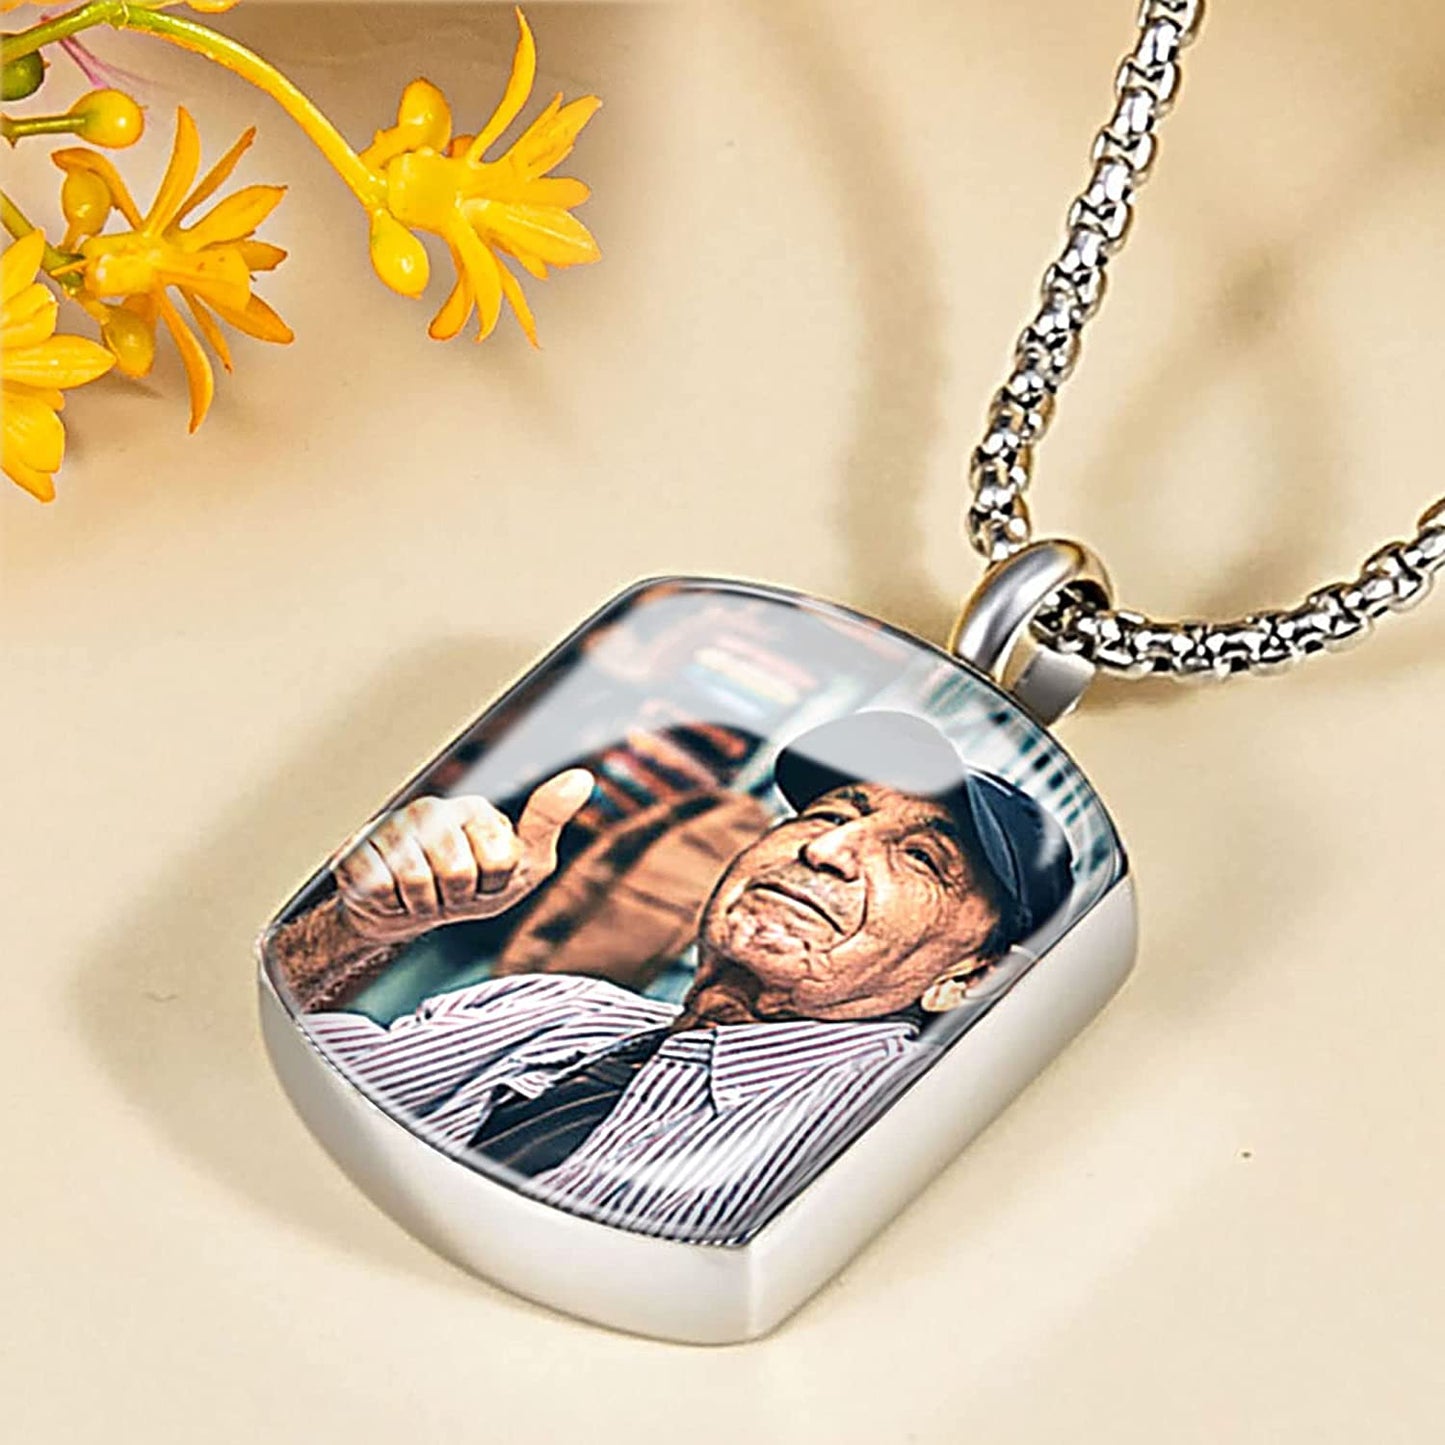 Personalized Custom Engraving Photo & Text Cremation Jewelry Urn Necklace for Ashes Keepsake Memorial Pendant